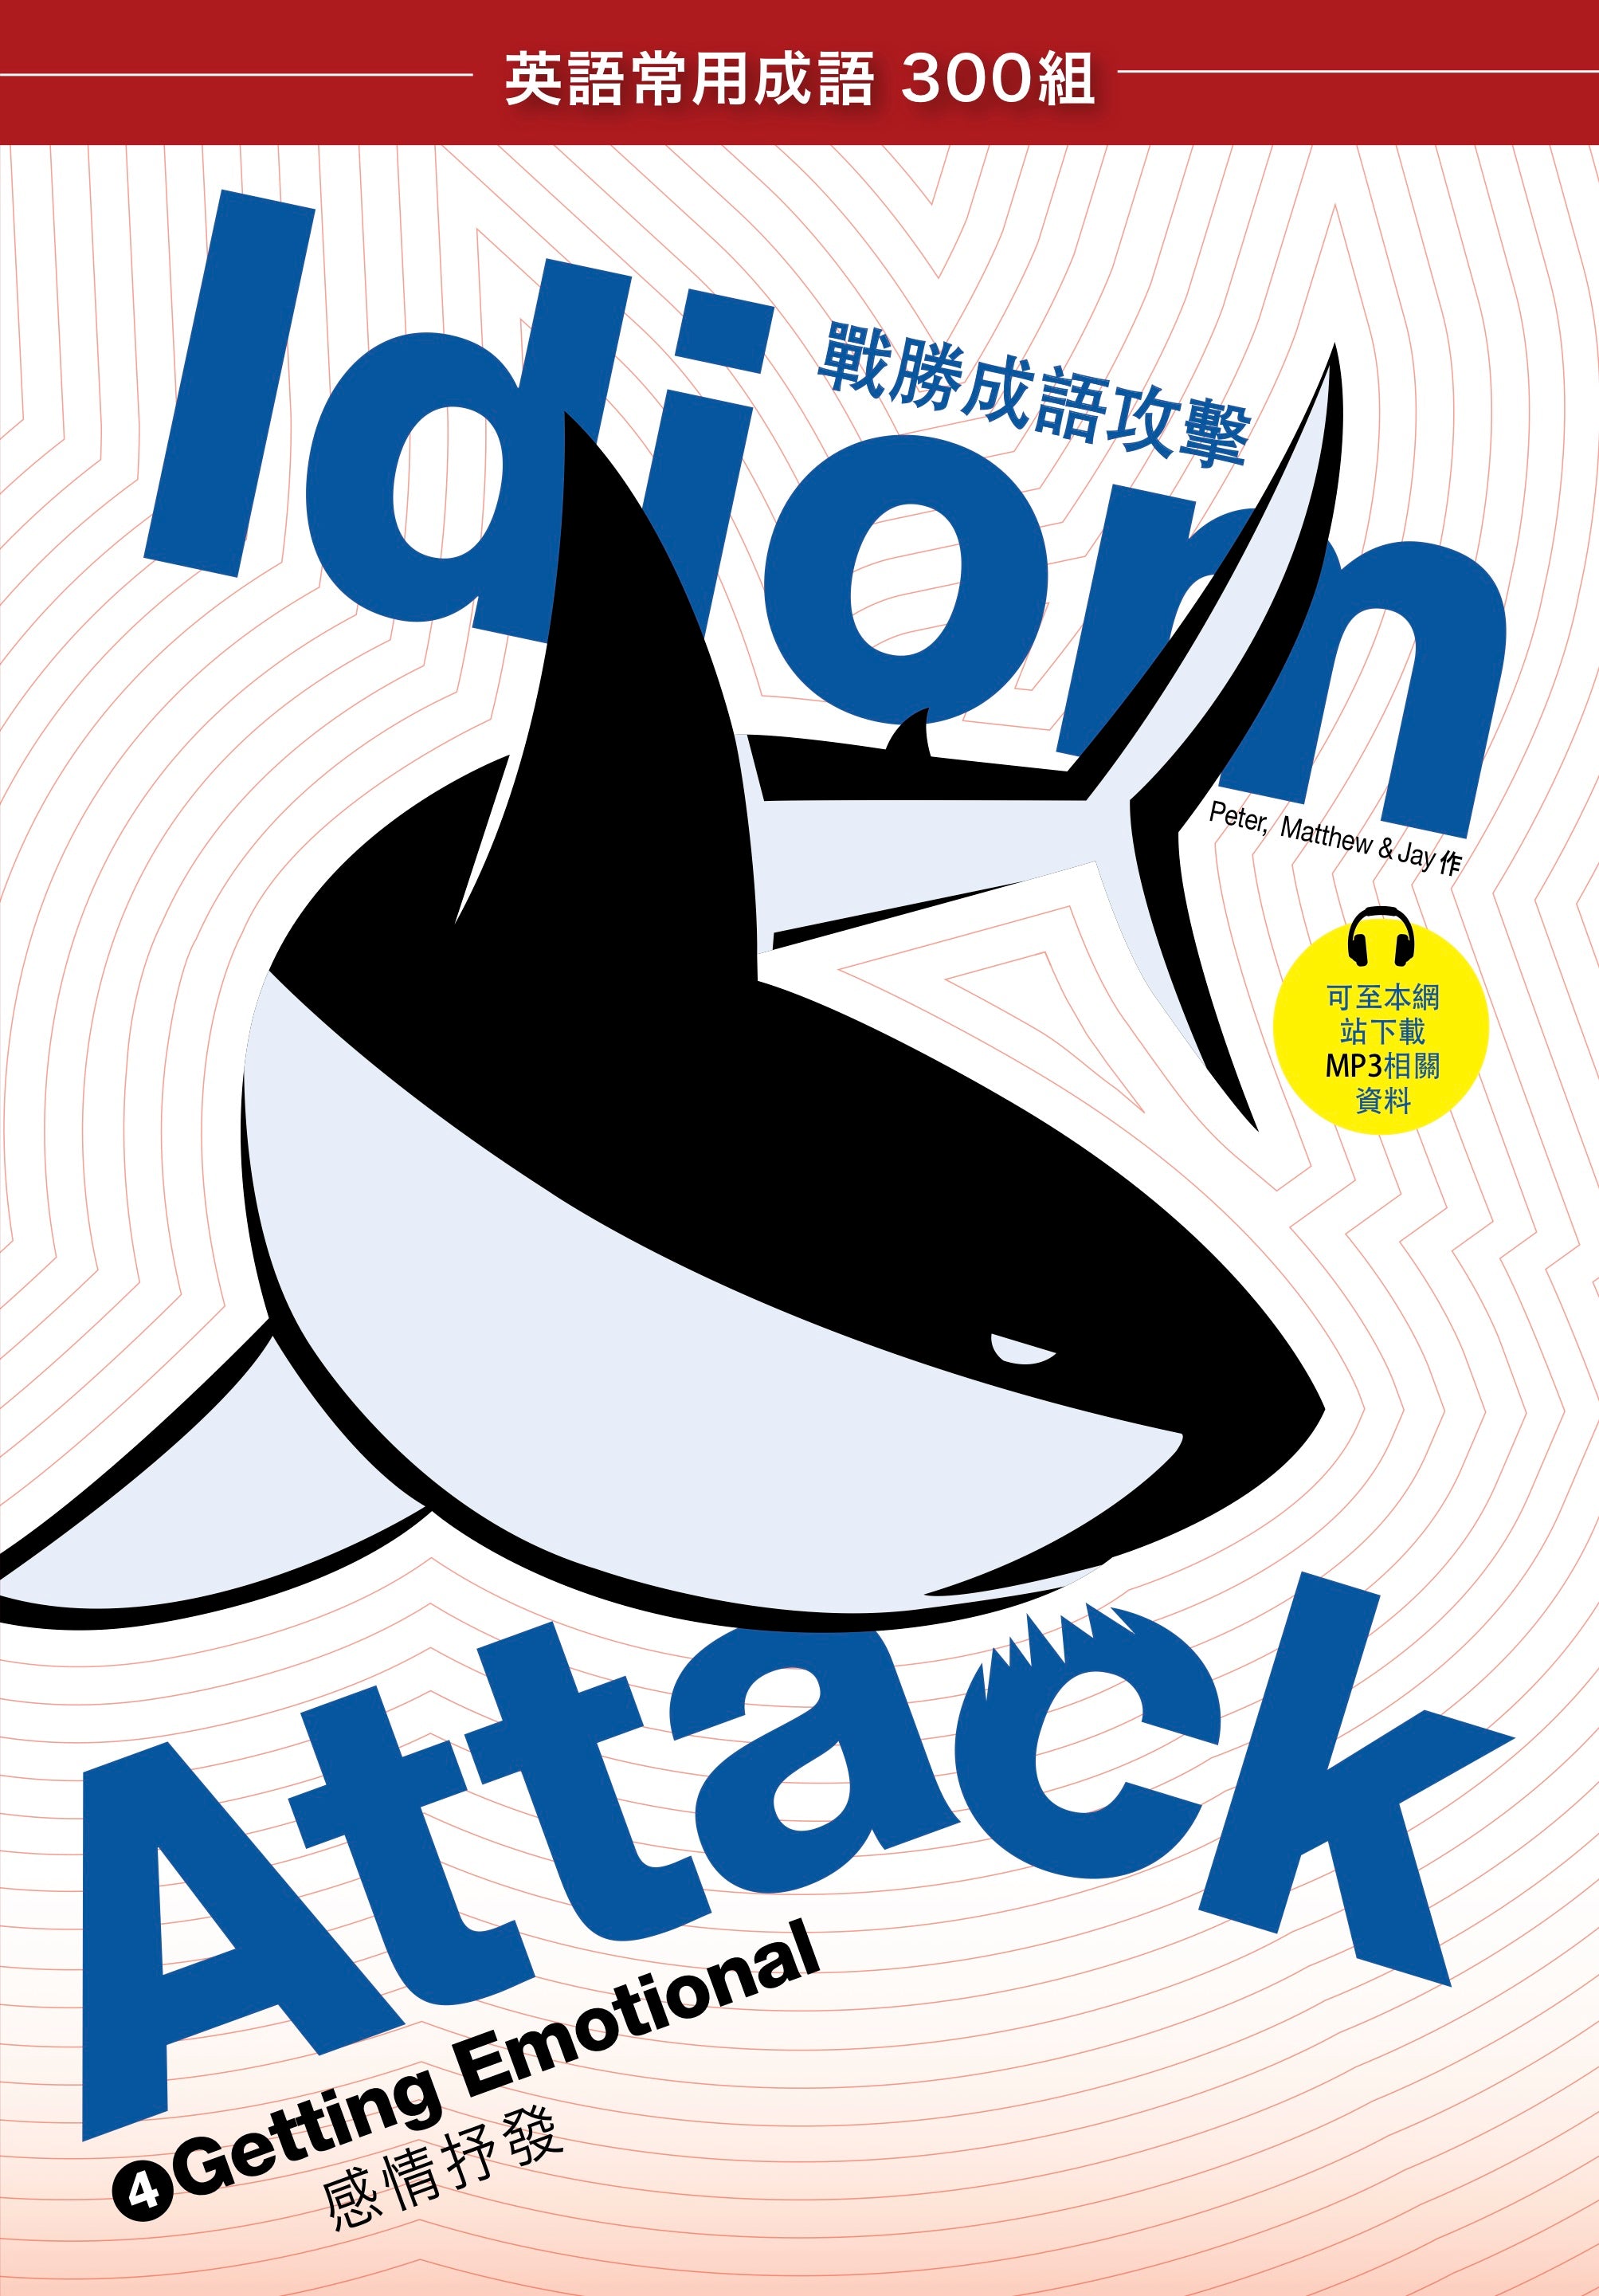 Idiom Attack Vol. 4 - Getting Emotional (Trad. Chinese Edition): 職場必備 4 - 感情抒發 : English Idioms for ESL Learners: With 300+ Idioms in 25 Themed Chapters w/ free MP3 at IdiomAttack.com